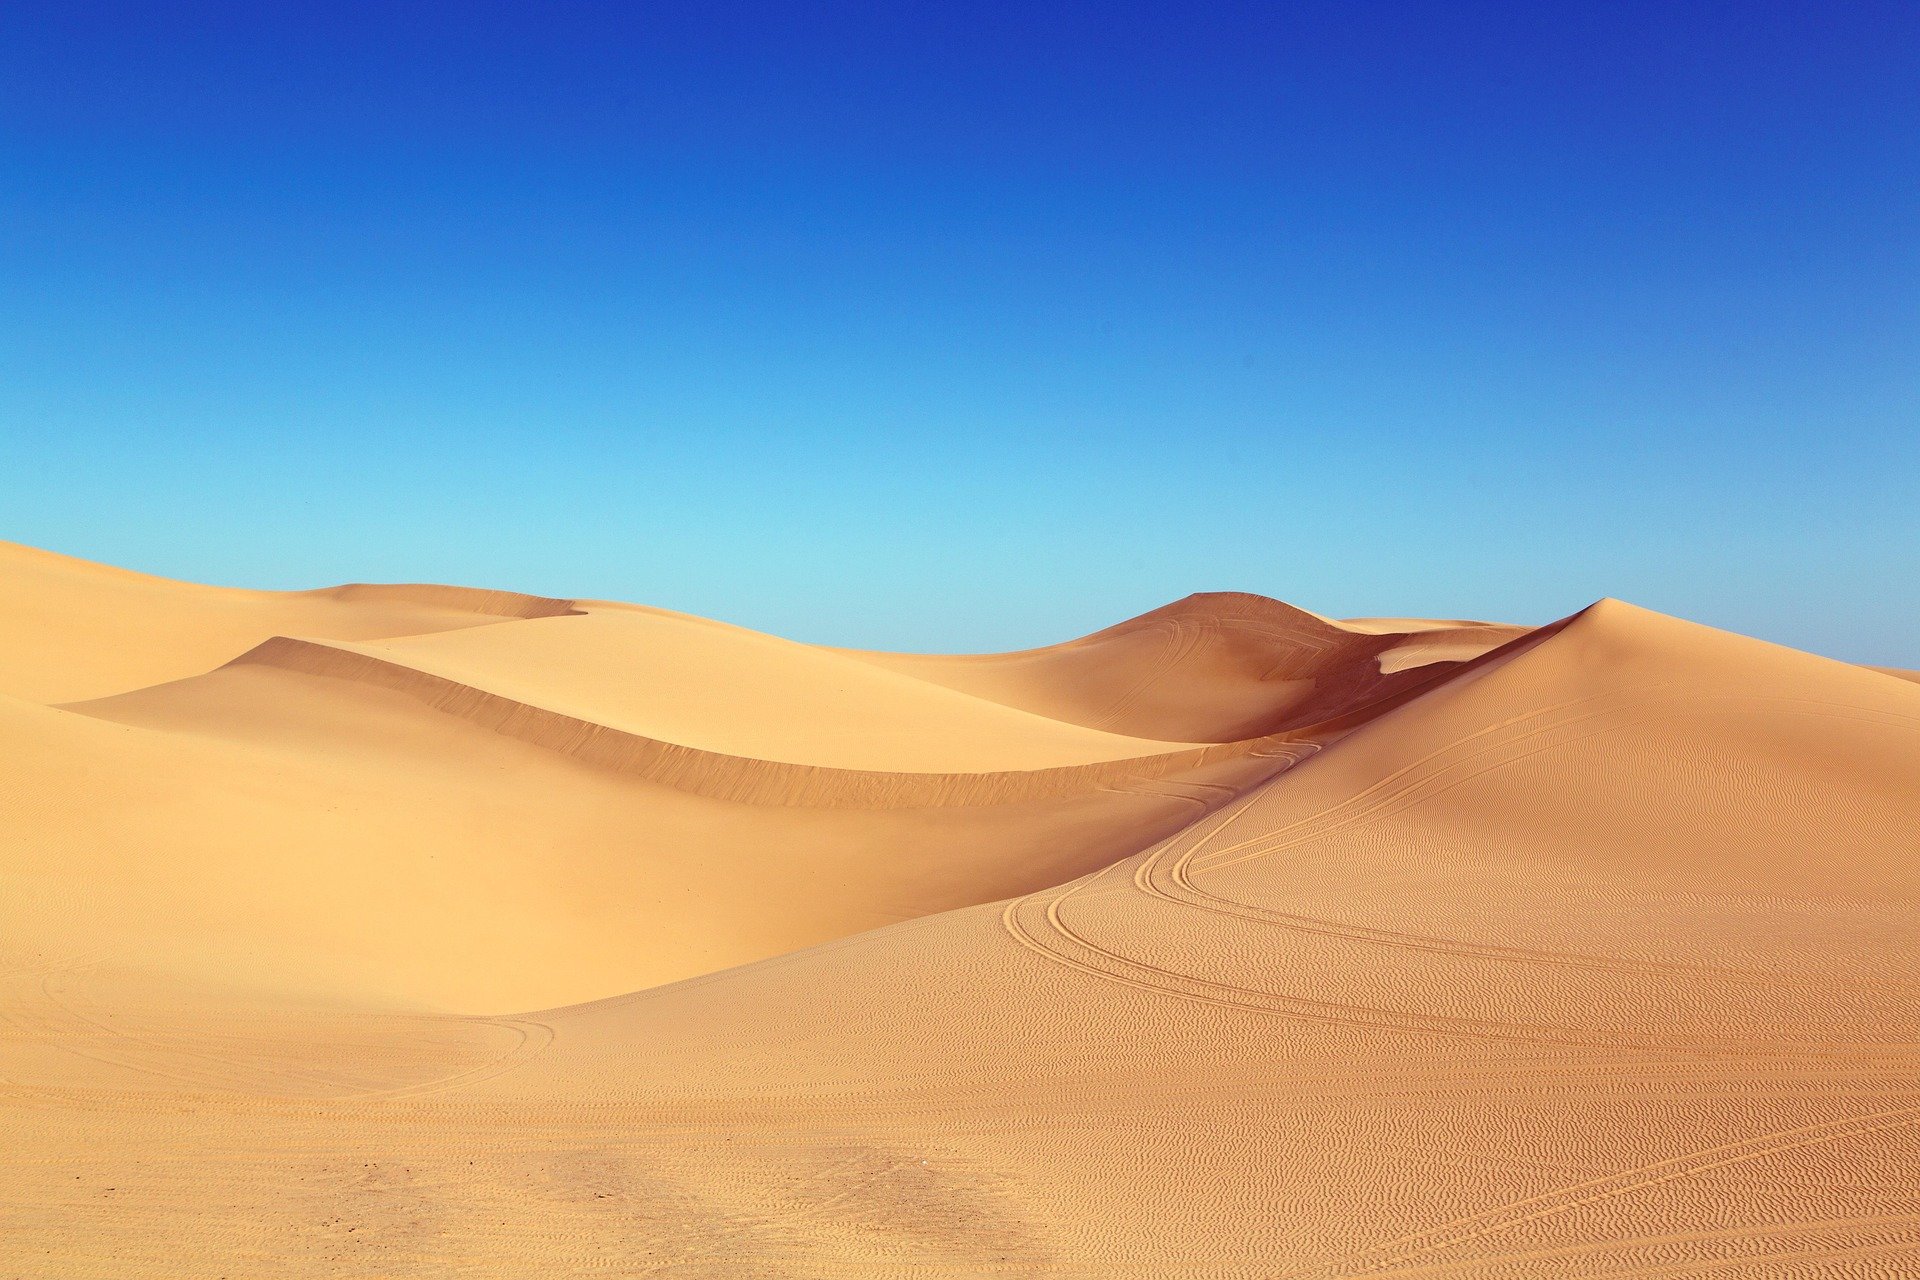 Star dune: Scientists solve mystery behind Earth's largest desert sands